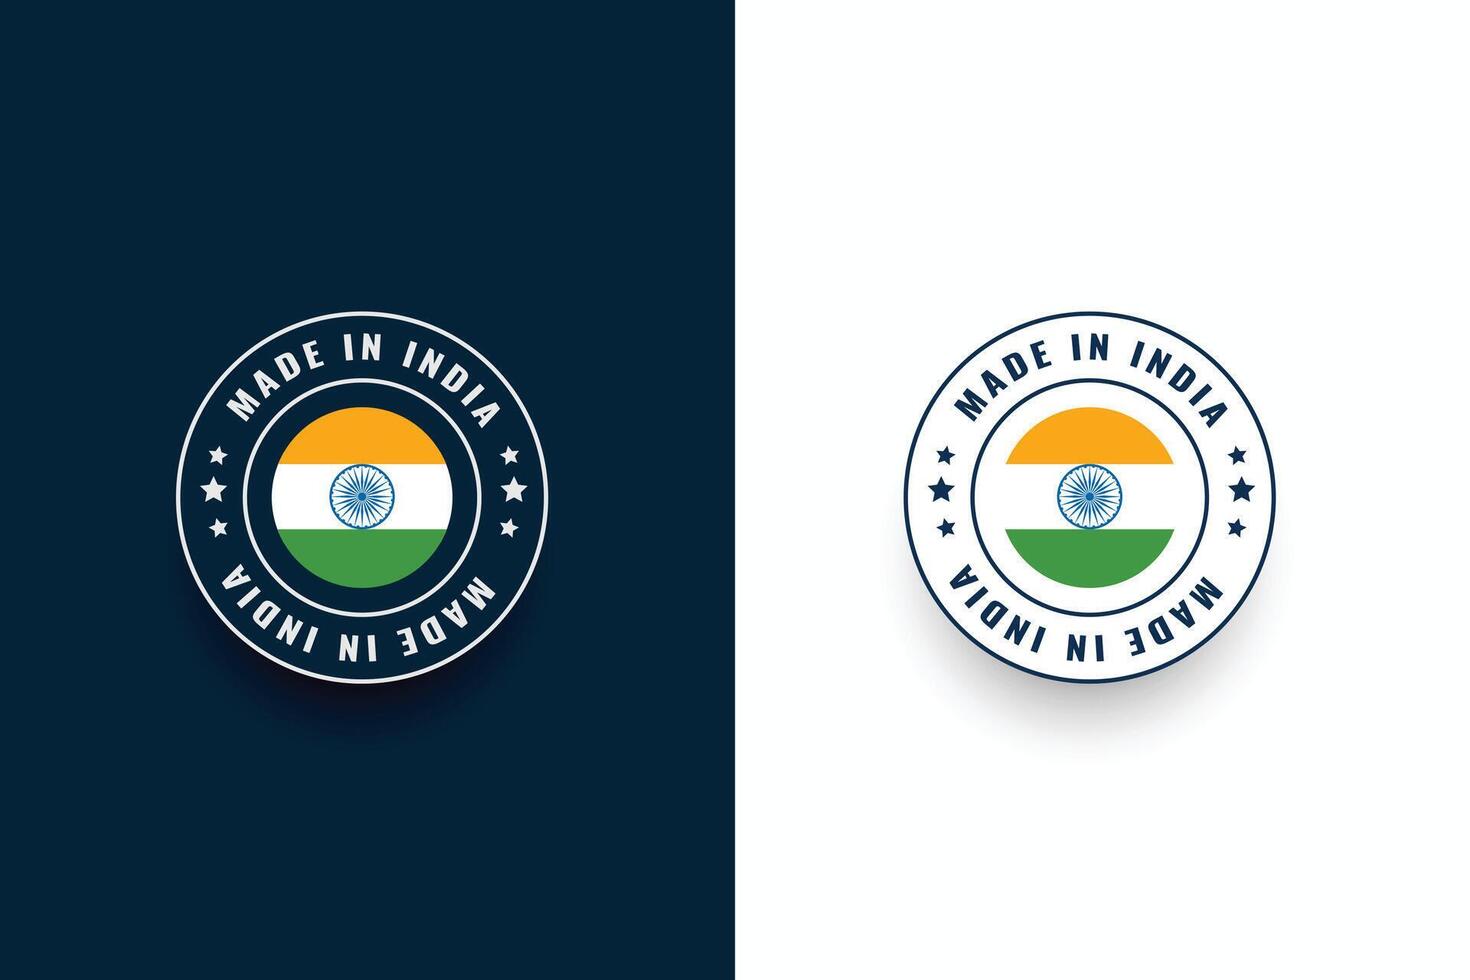 made in india circular tricolor badge banner celebrate the nation's pride vector